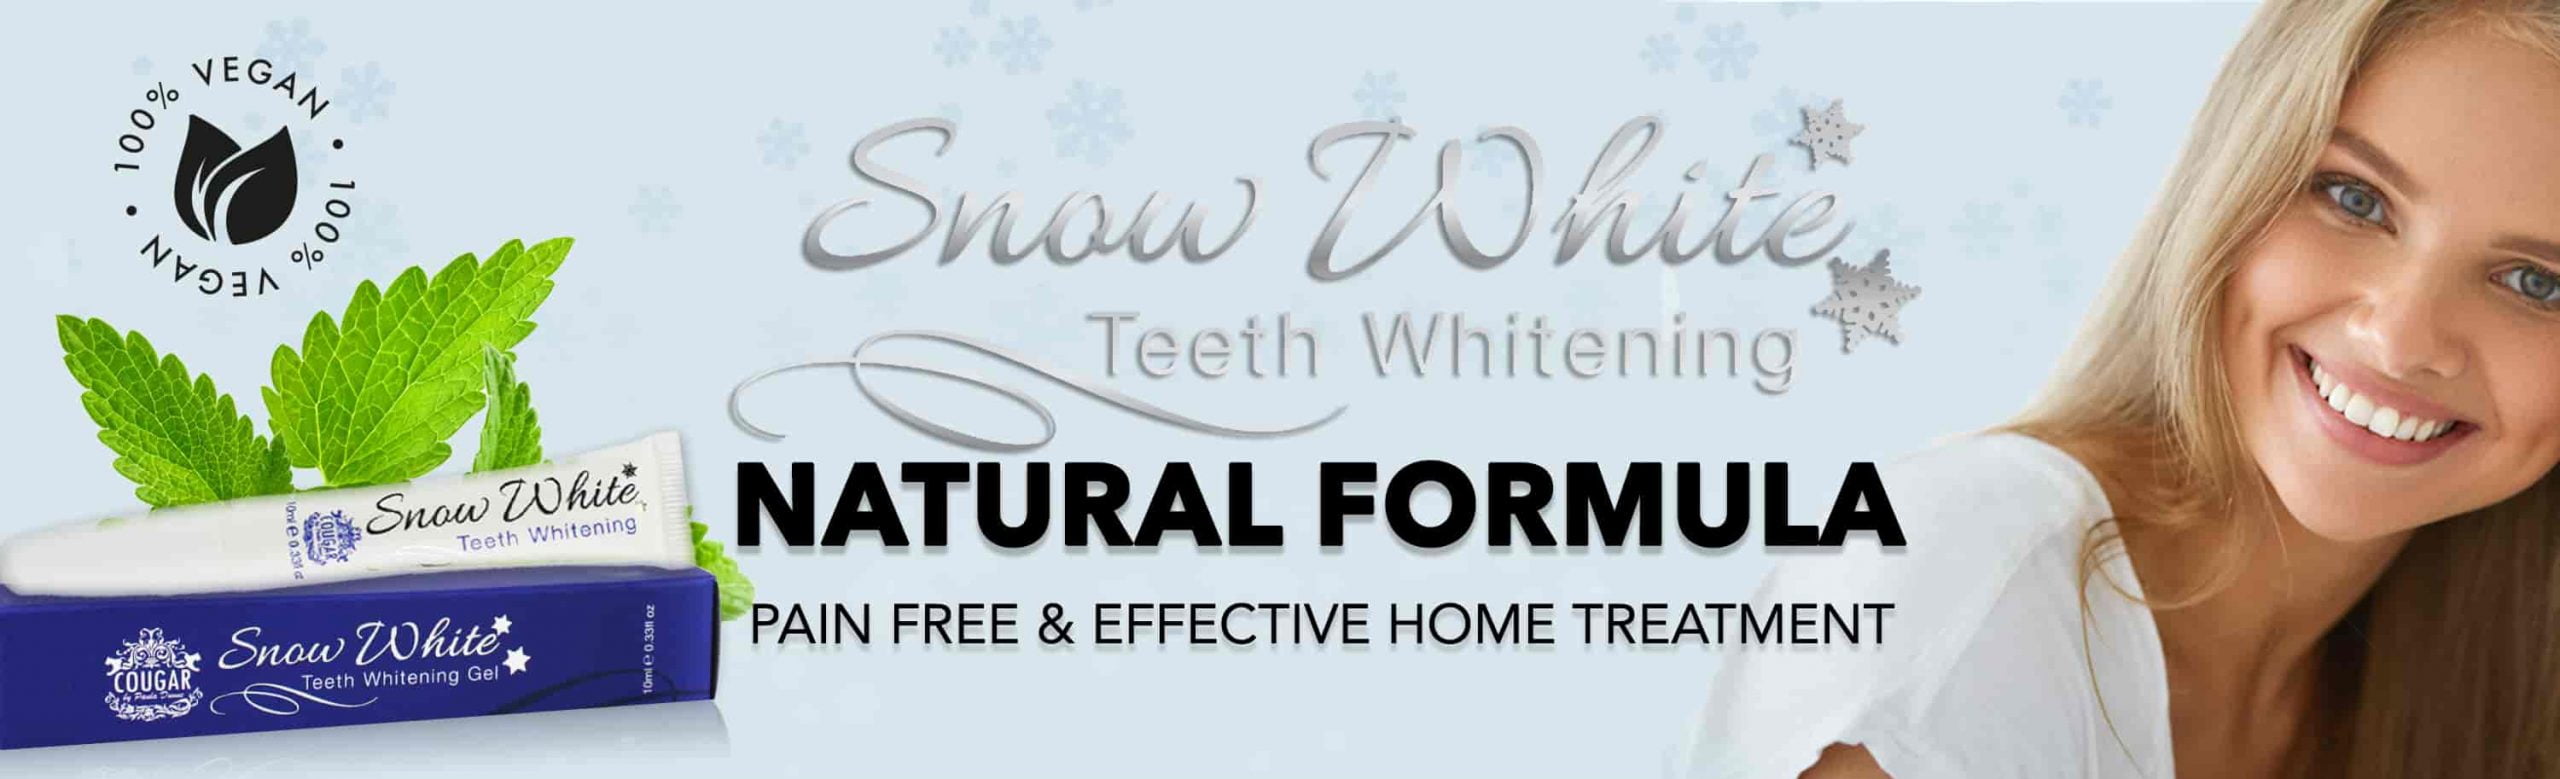 Natural Teeth Whitening Kits which give outstanding results.